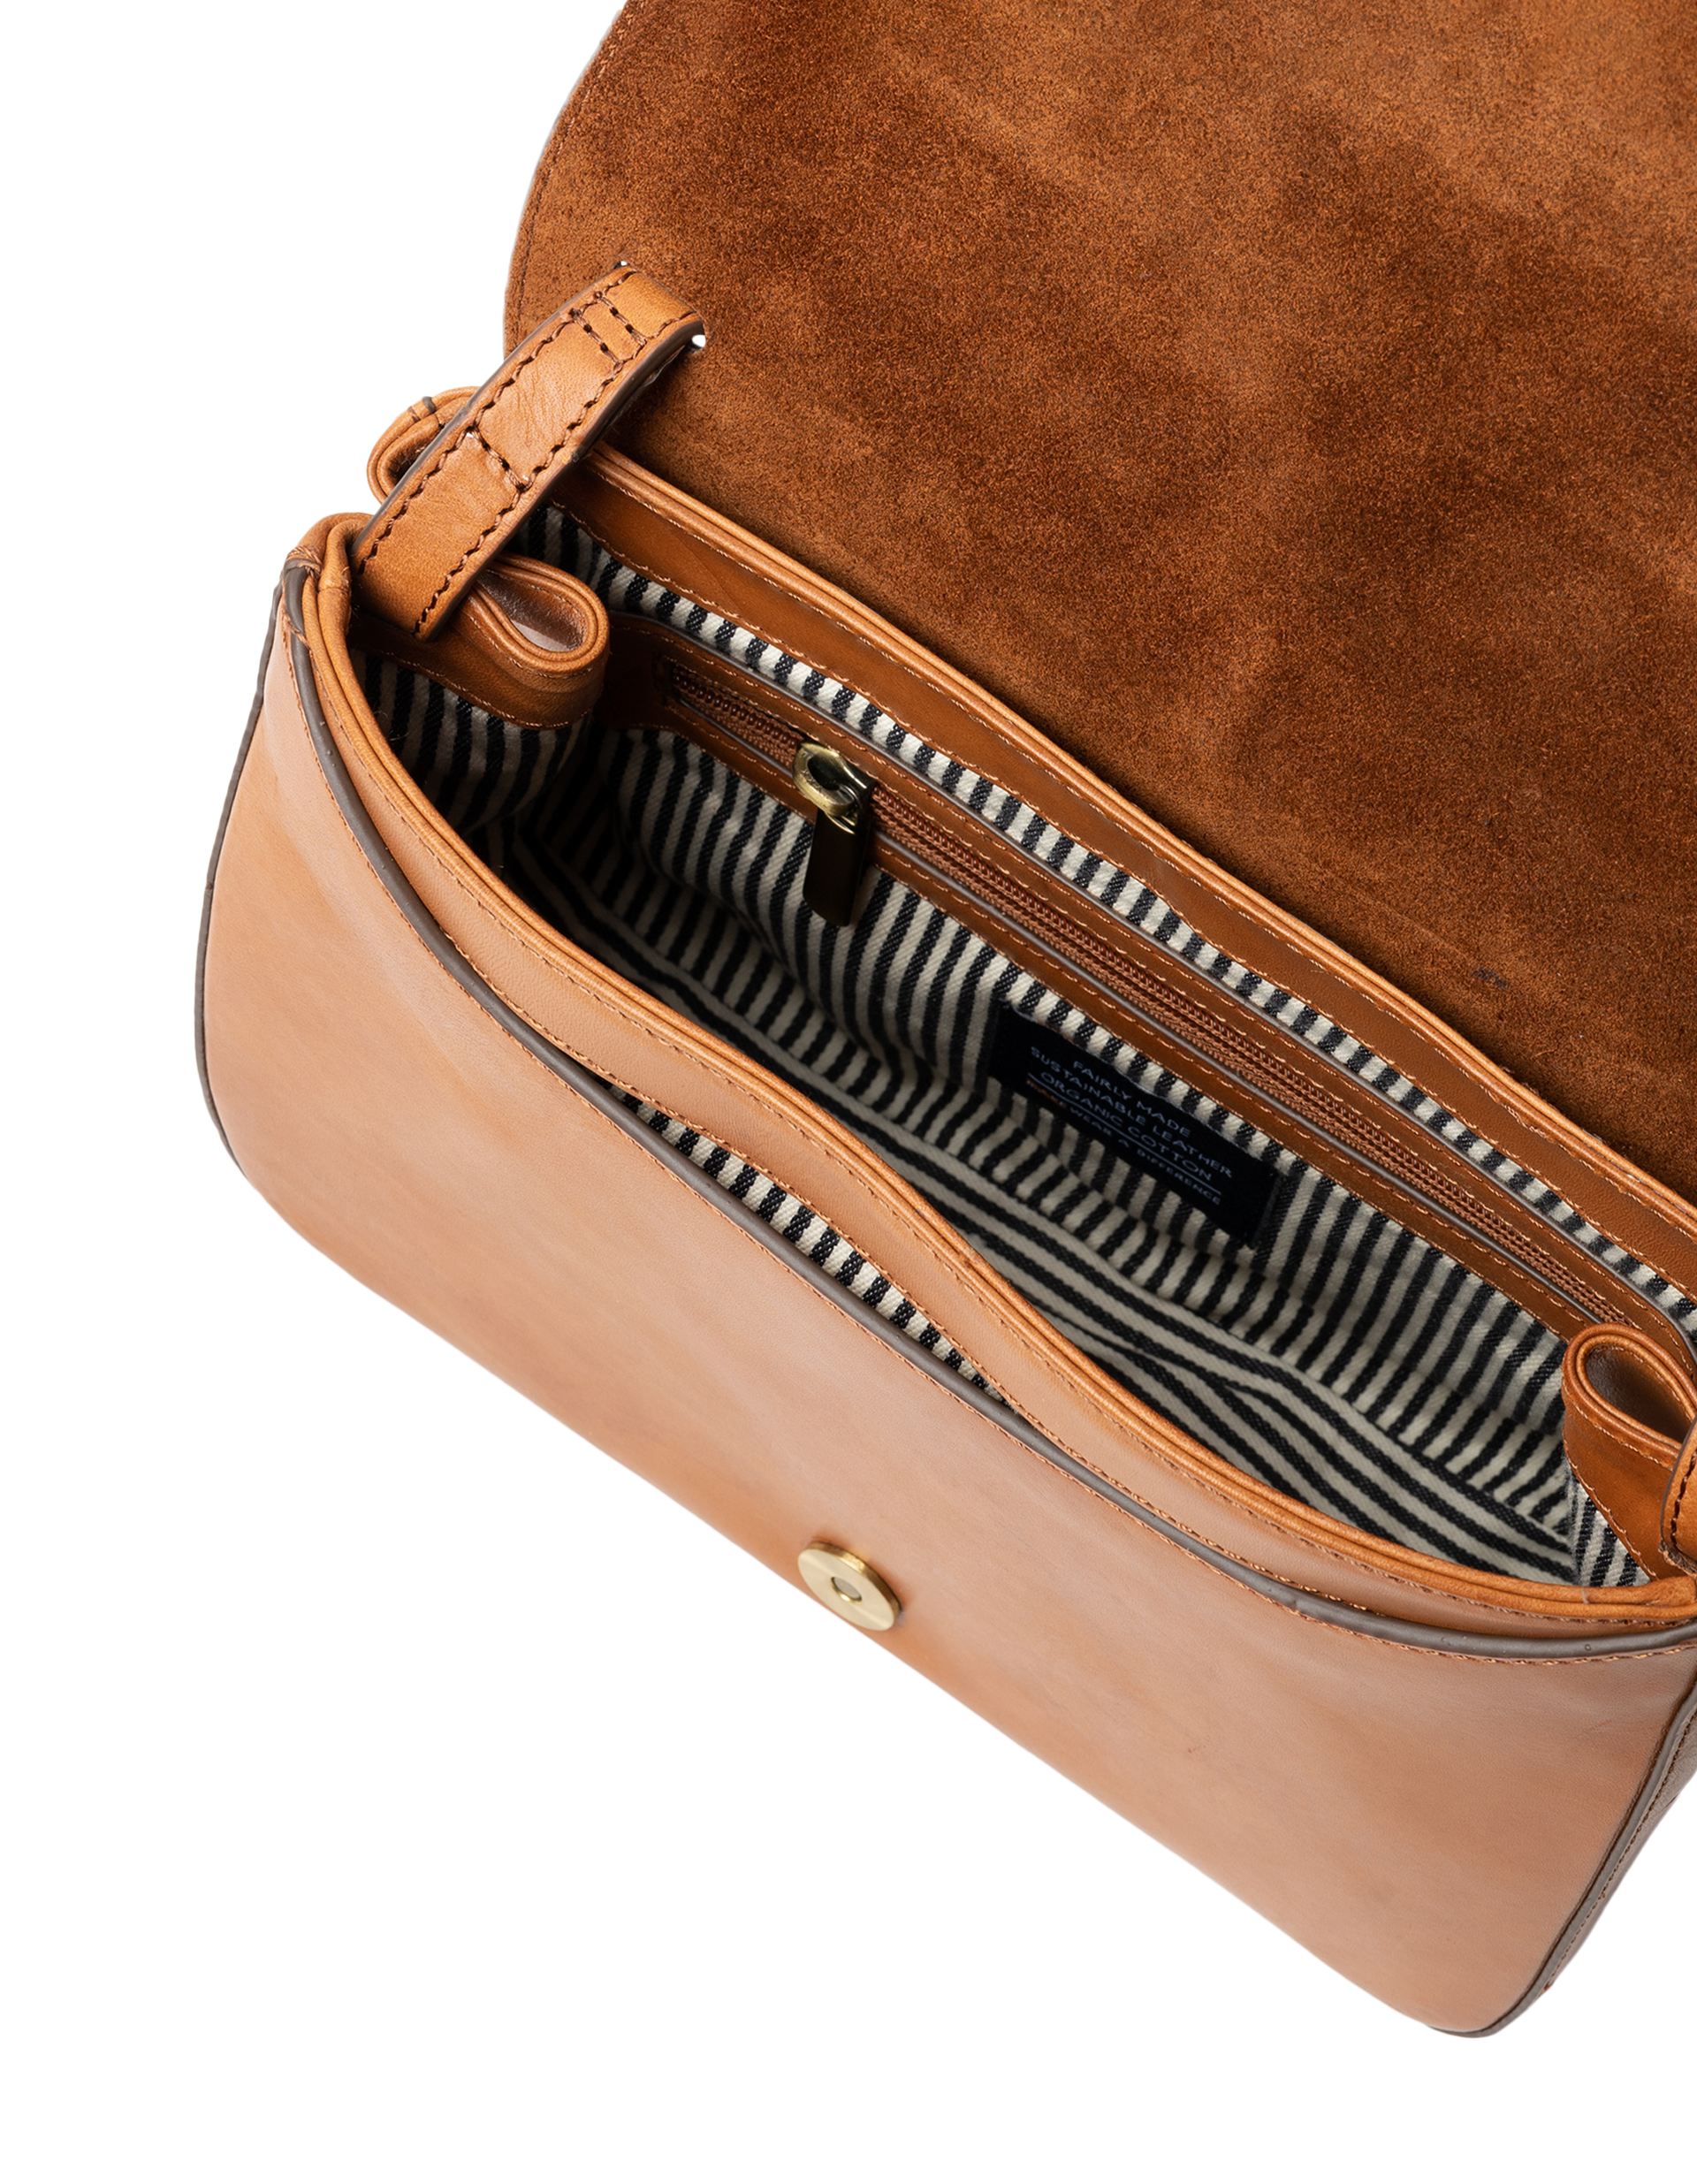 Lucy in cognac classic leather. Crossbody handbag. Inside product image.